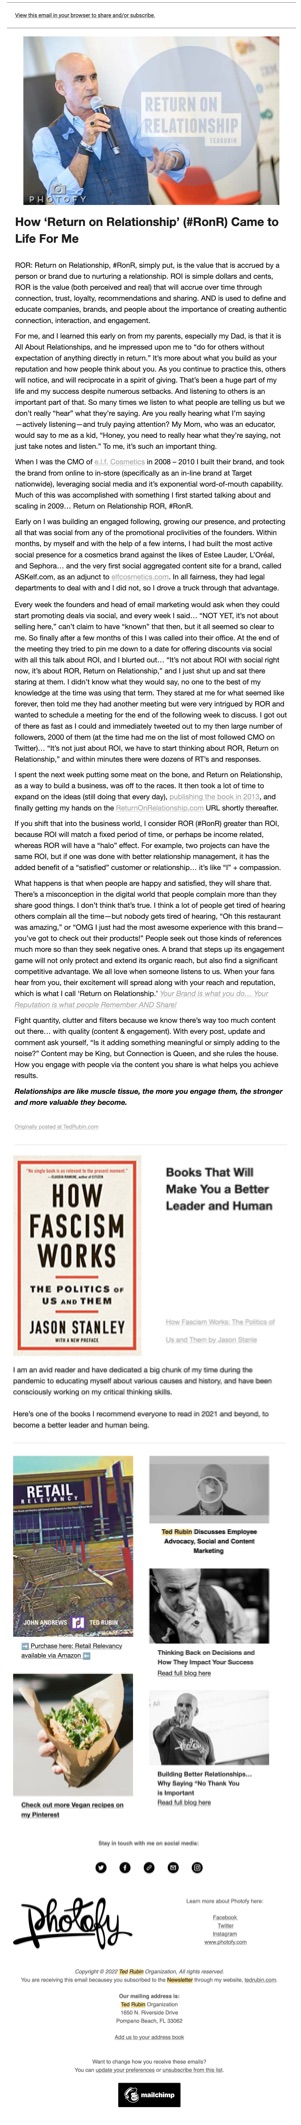 Ted Rubin’s Straight Talk newsletter - click to view larger version